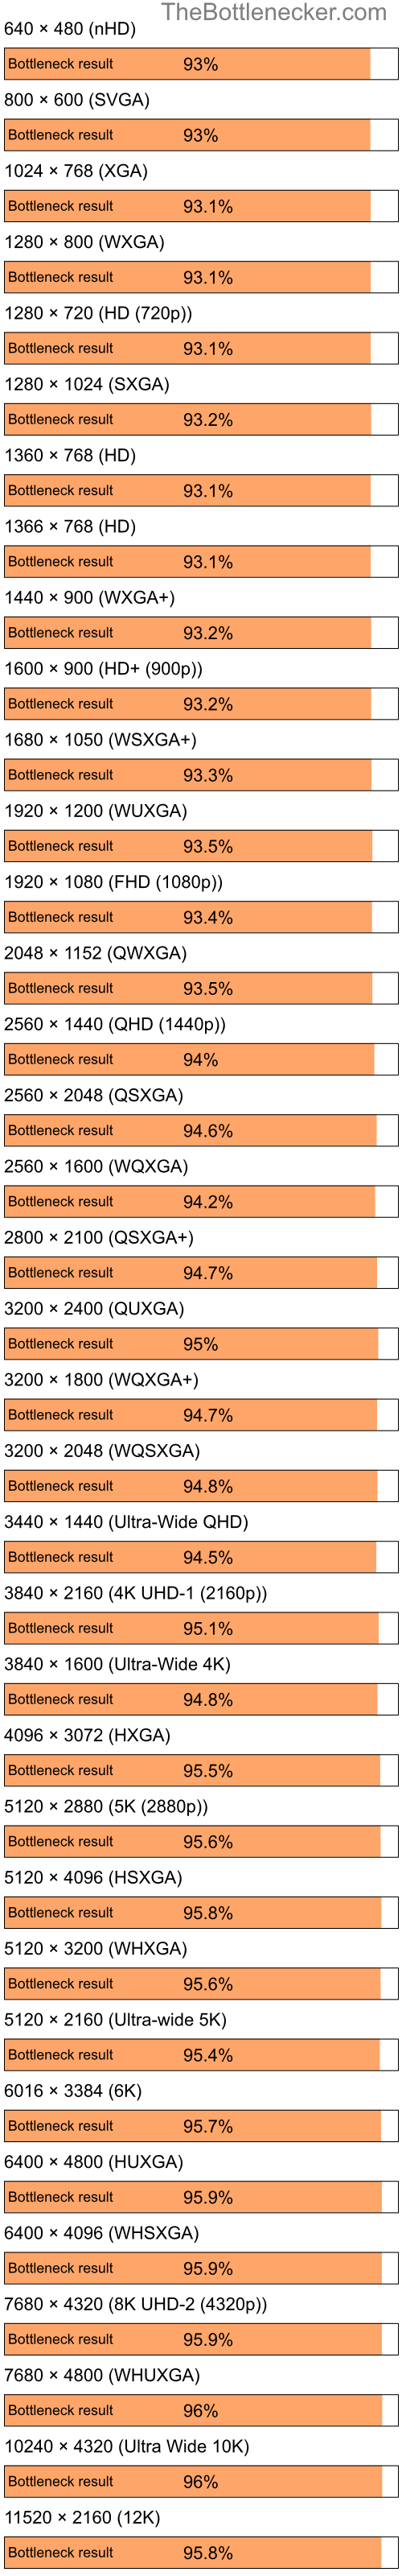 Bottleneck results by resolution for Intel Atom Z520 and AMD Radeon 9250 in Graphic Card Intense Tasks